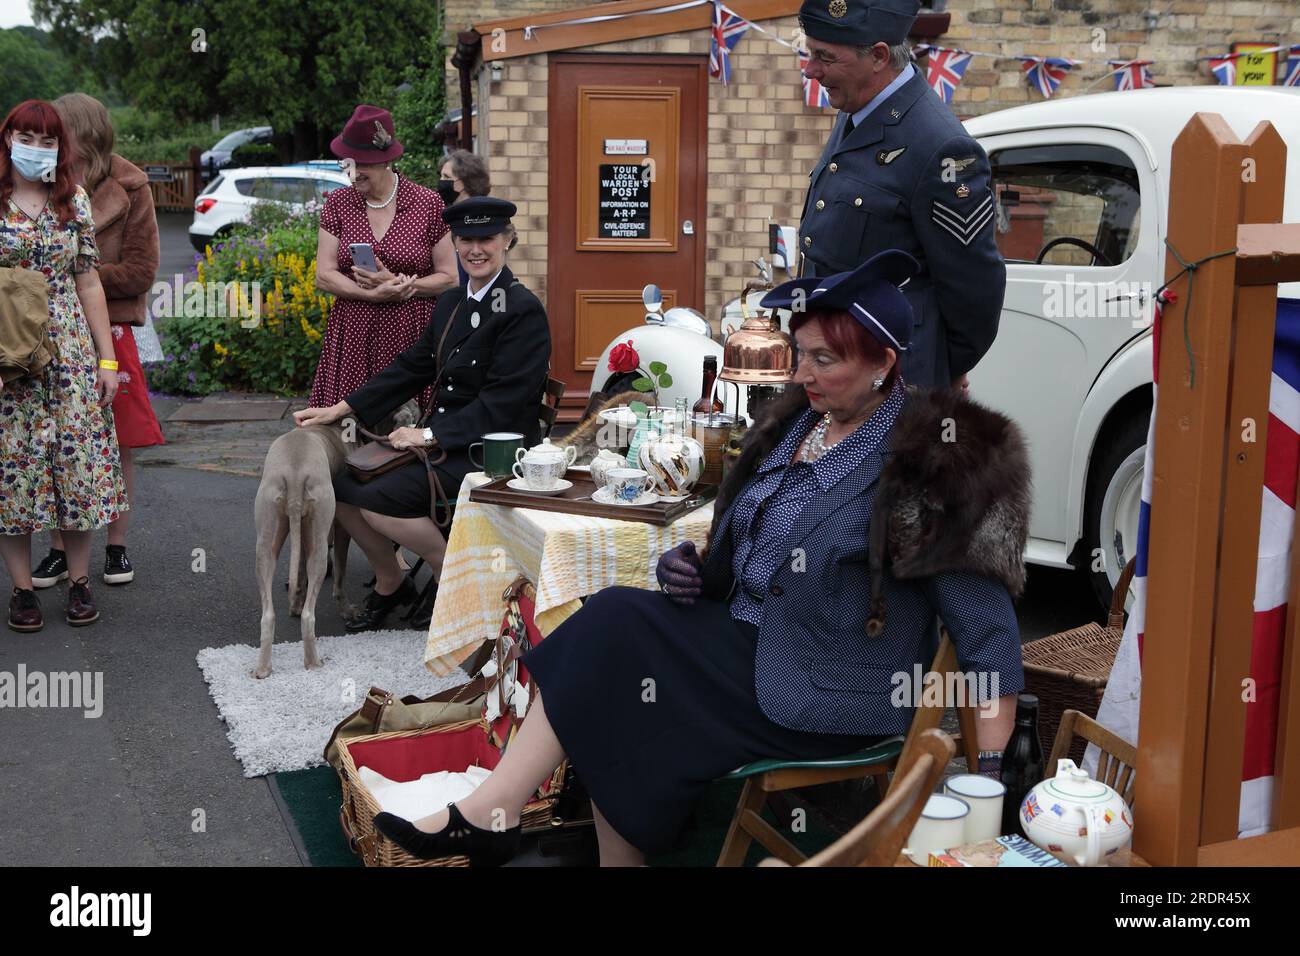 Revellers all dressed up to the nines enjoy a short break at Arley Station in Shropshire during the Severn Valley Railway 1940s day. Stock Photo